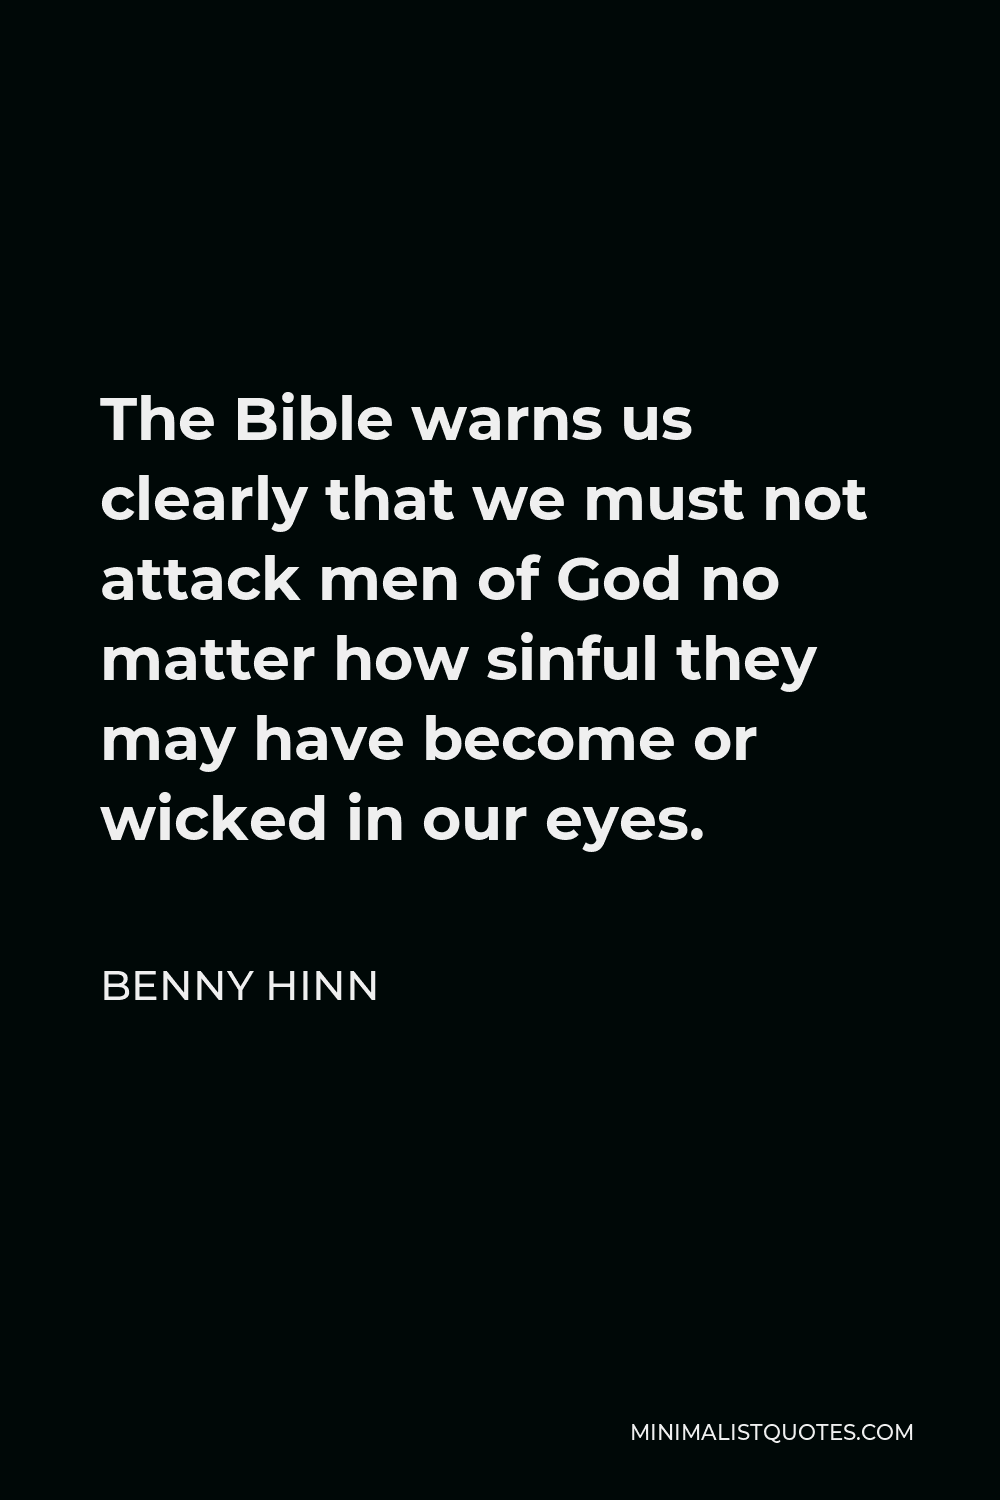 Benny Hinn Quote - The Bible warns us clearly that we must not attack men of God no matter how sinful they may have become or wicked in our eyes.